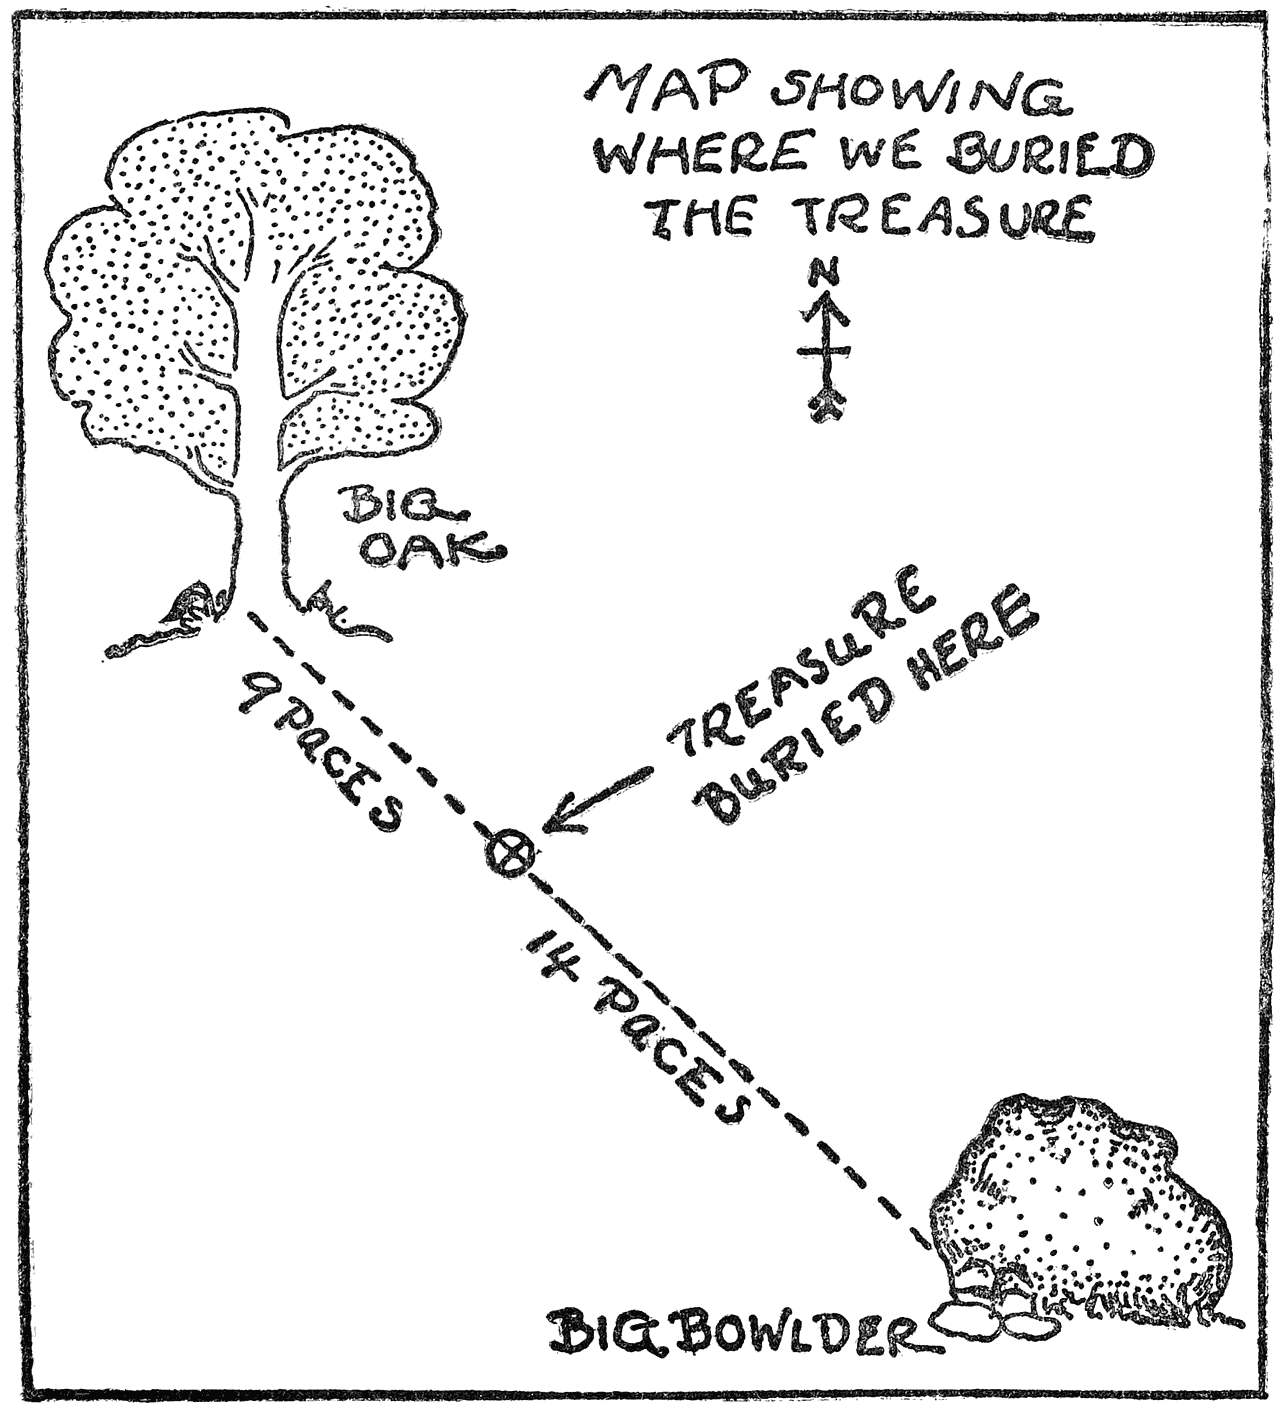 MAP SHOWING WHERE WE BURIED THE TREASURE